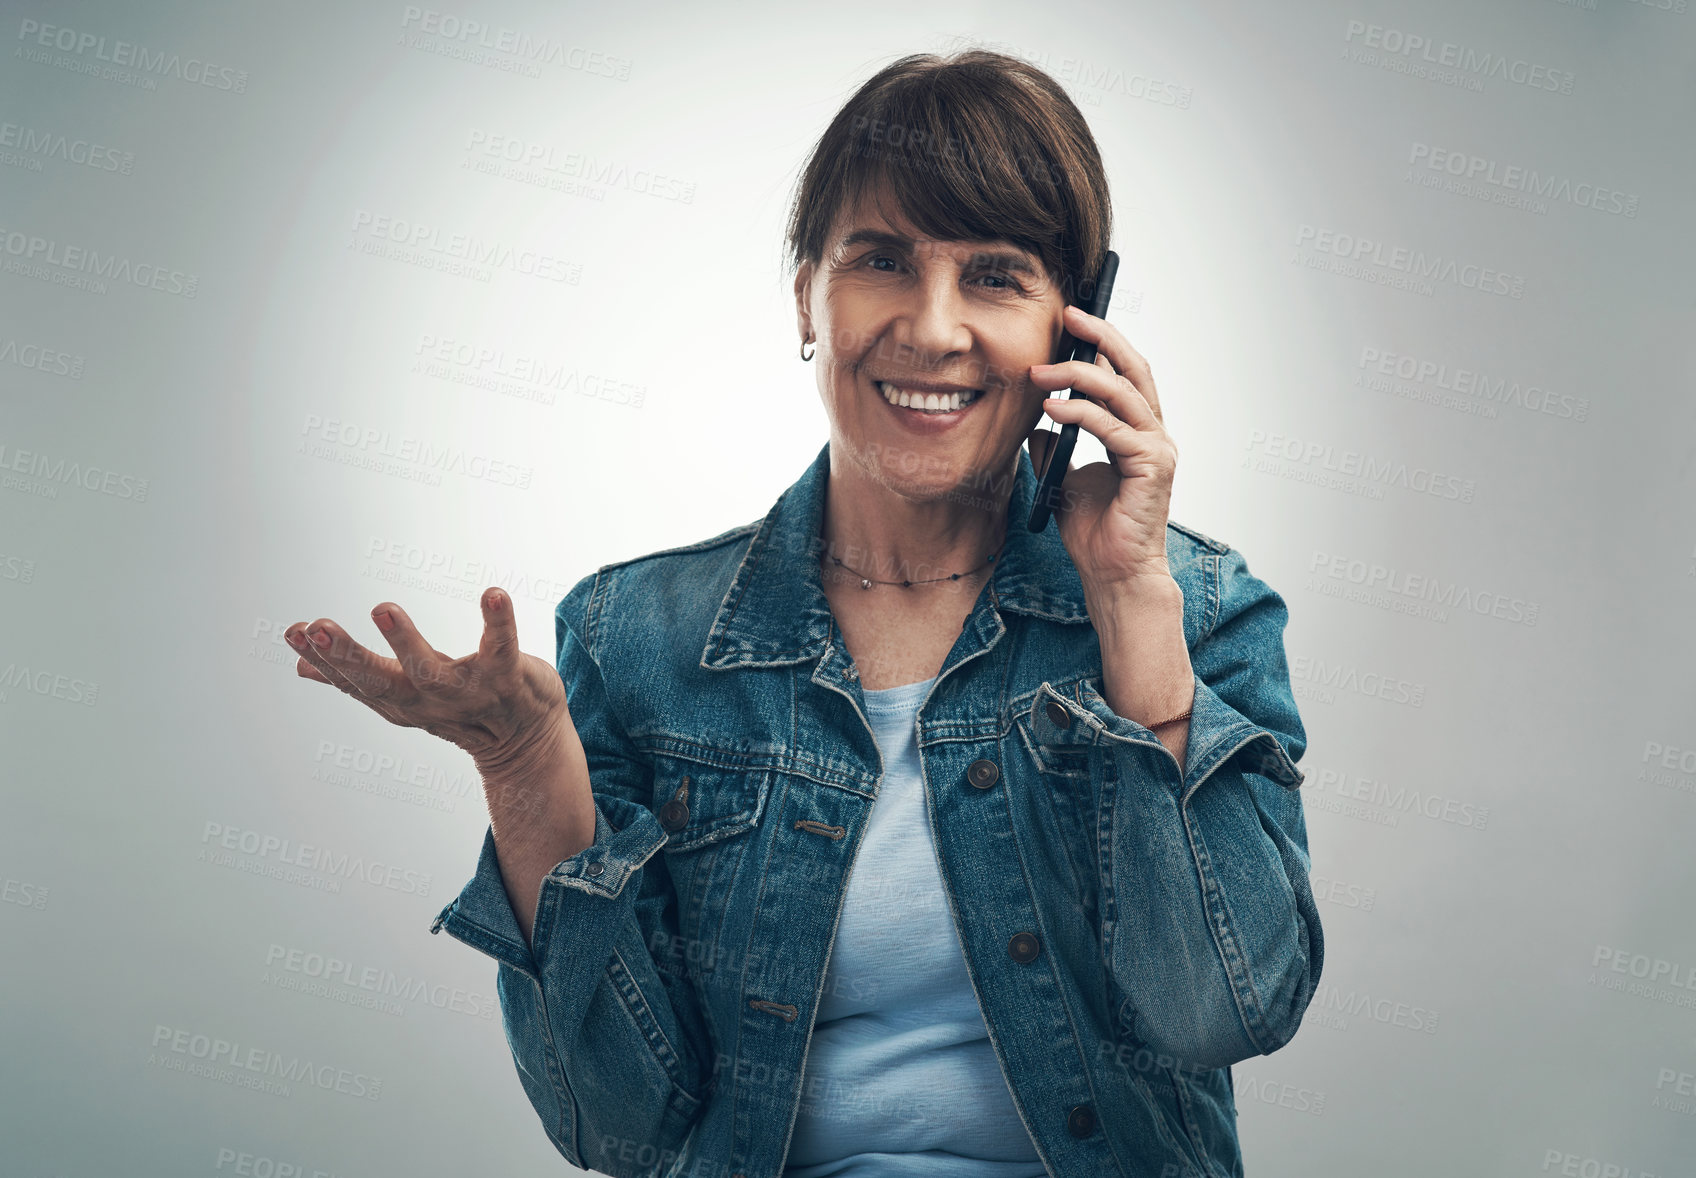 Buy stock photo Studio portrait of a senior woman talking on a cellphone against a grey background